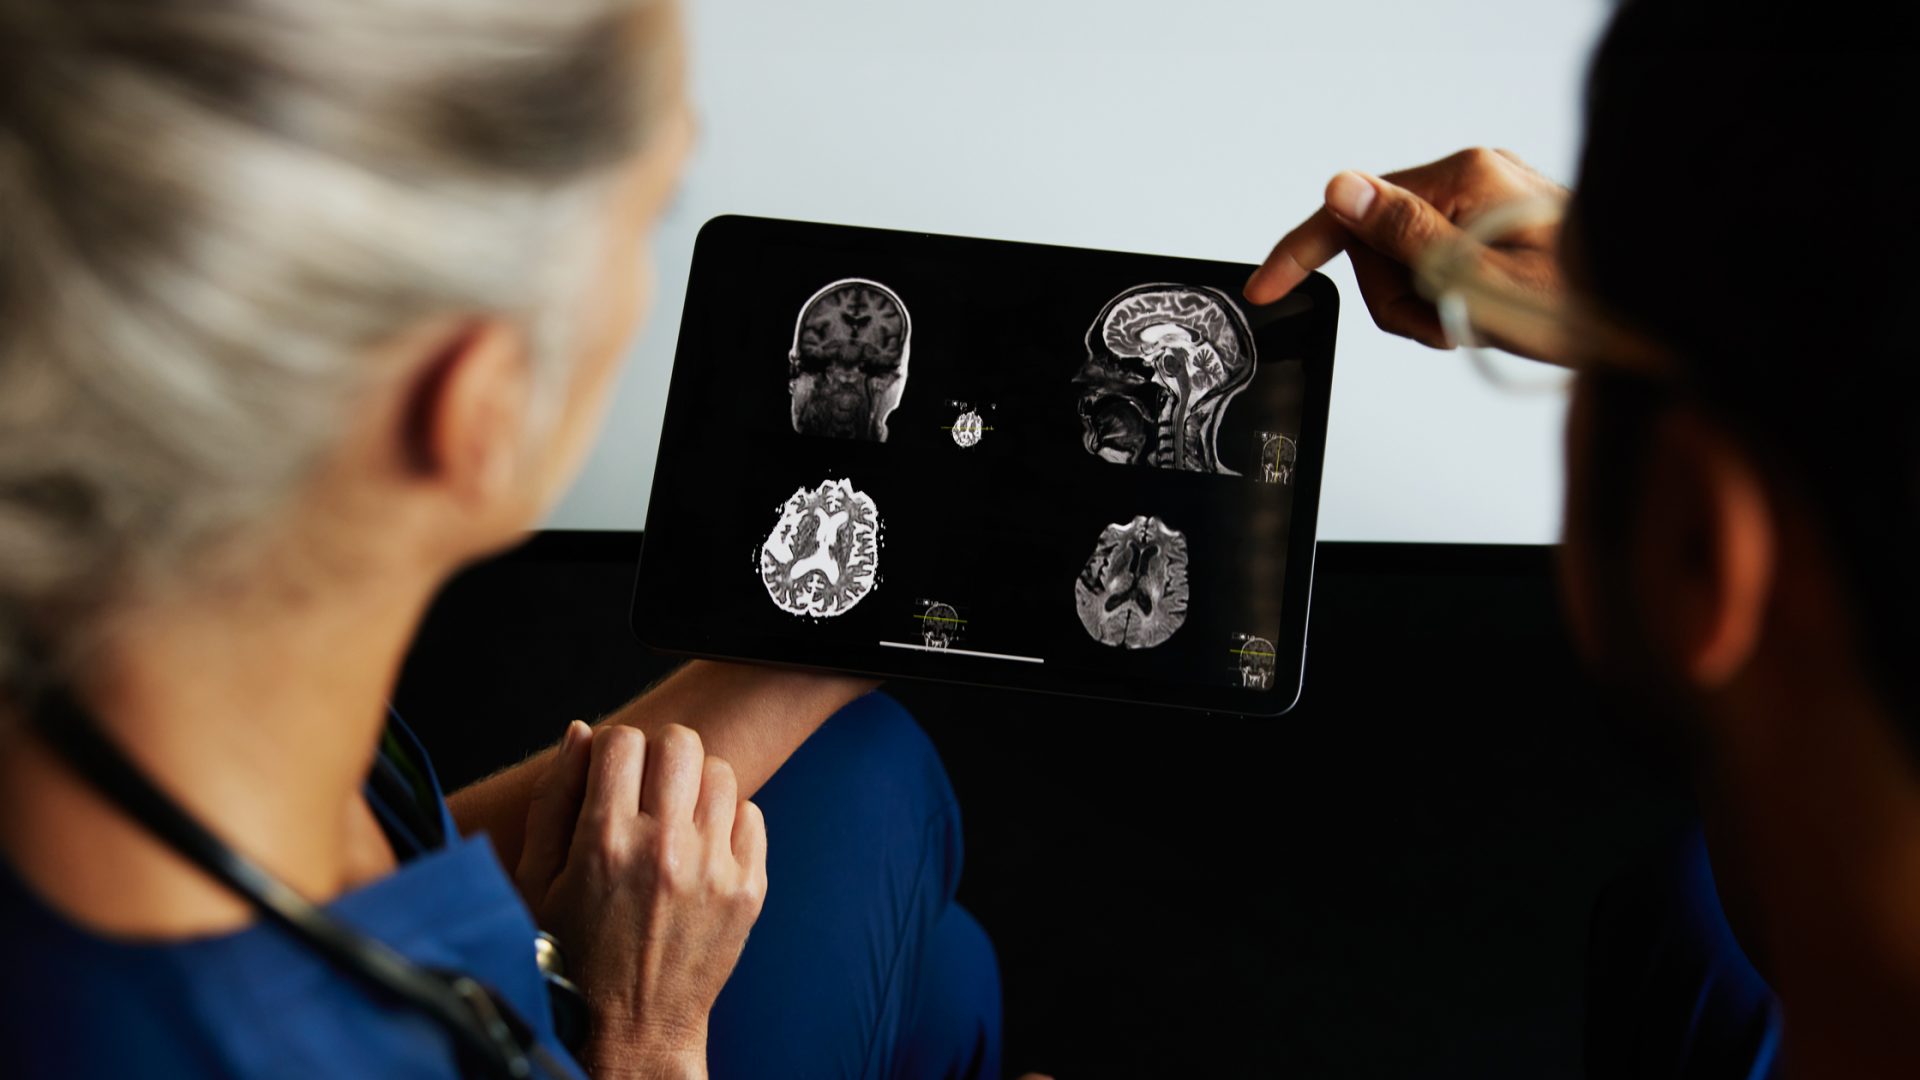 One healthcare provider holding a tablet with brain scan images while another healthcare provider points to one of the images